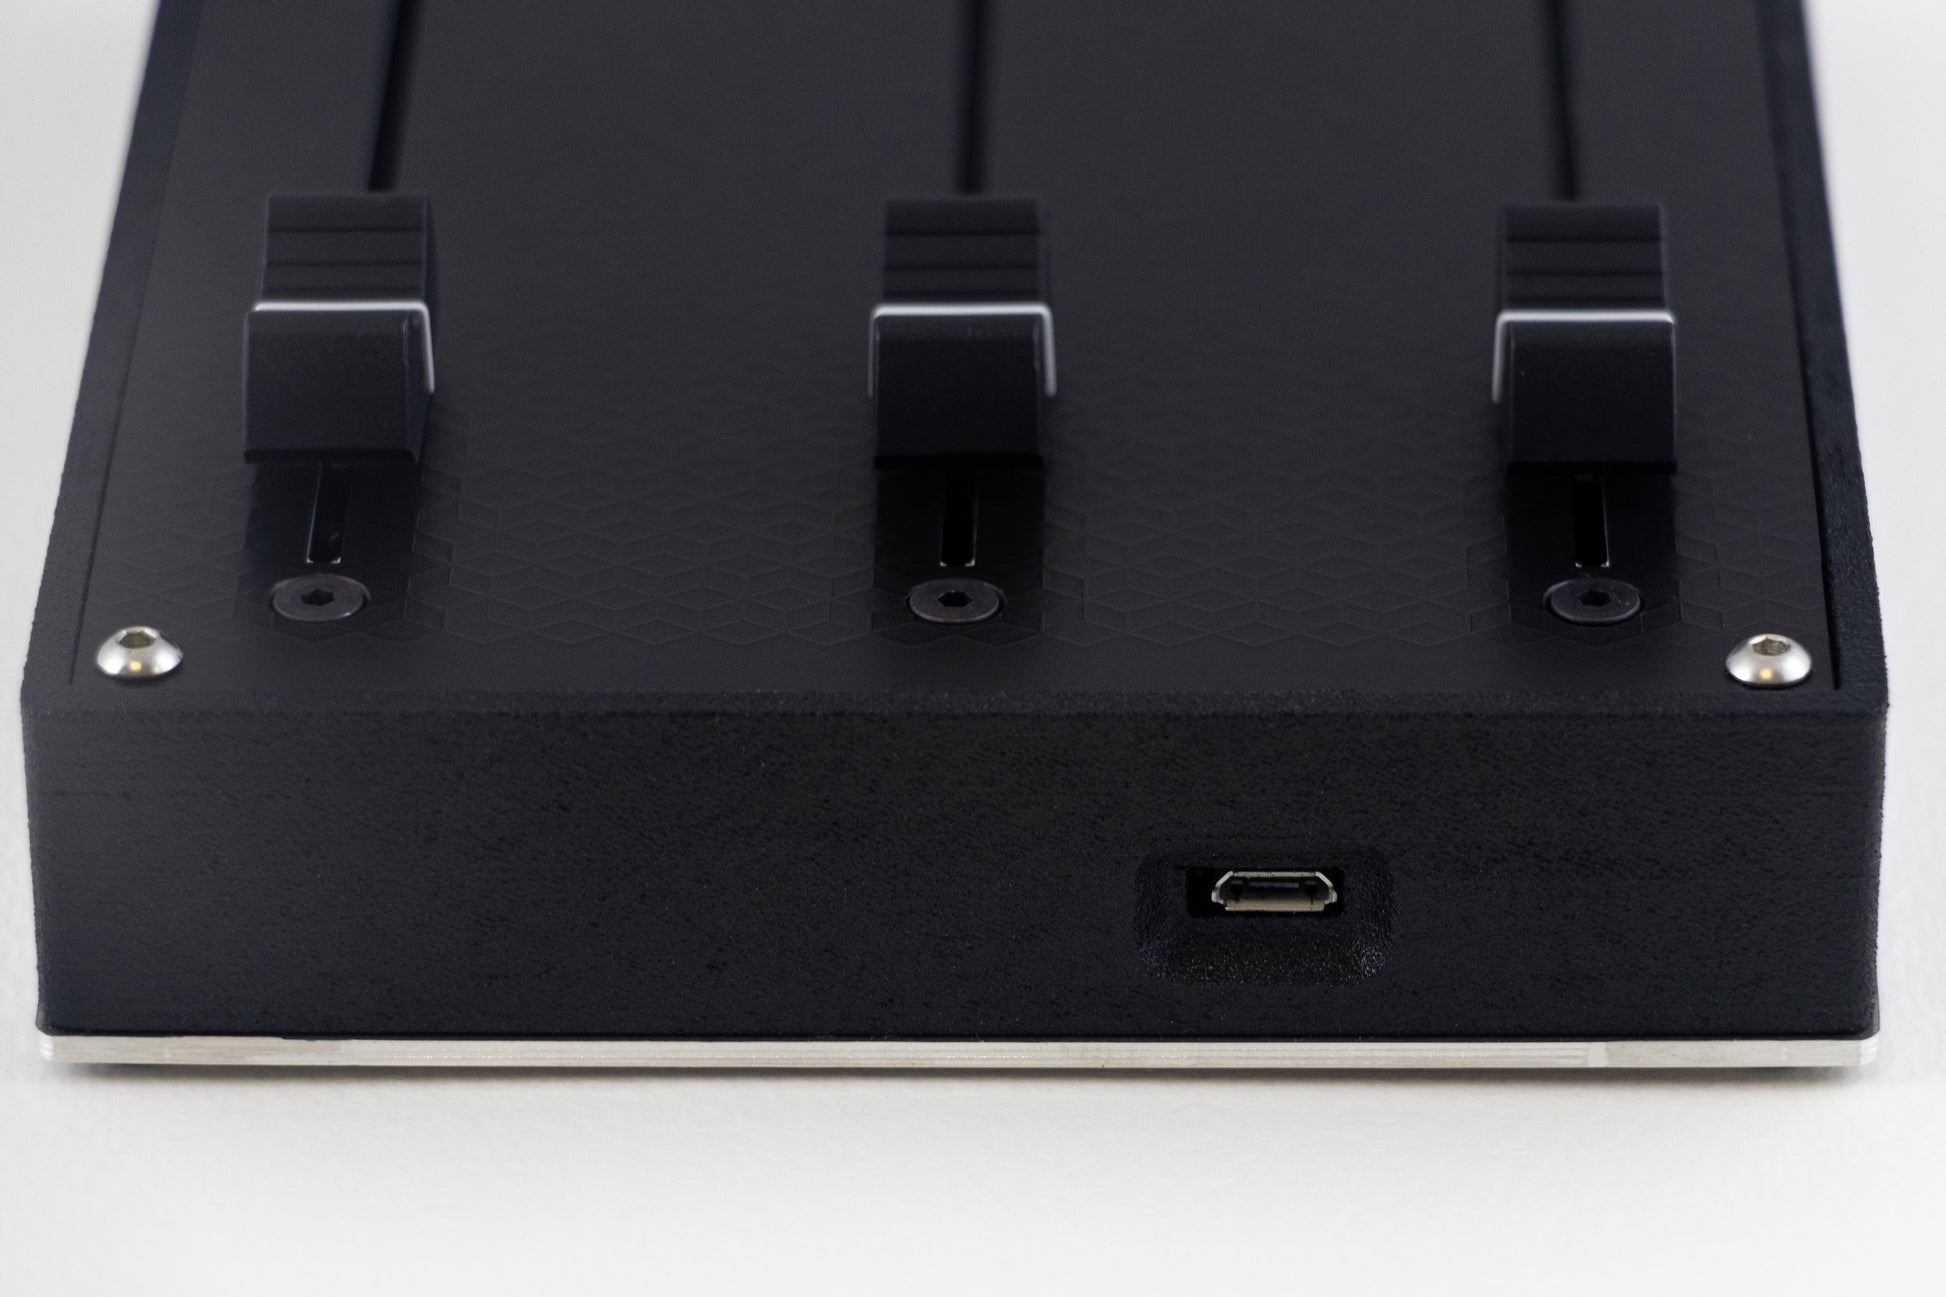 Conductor Midi Controller by Ghost Note Audio - Back view showing USB Micro port